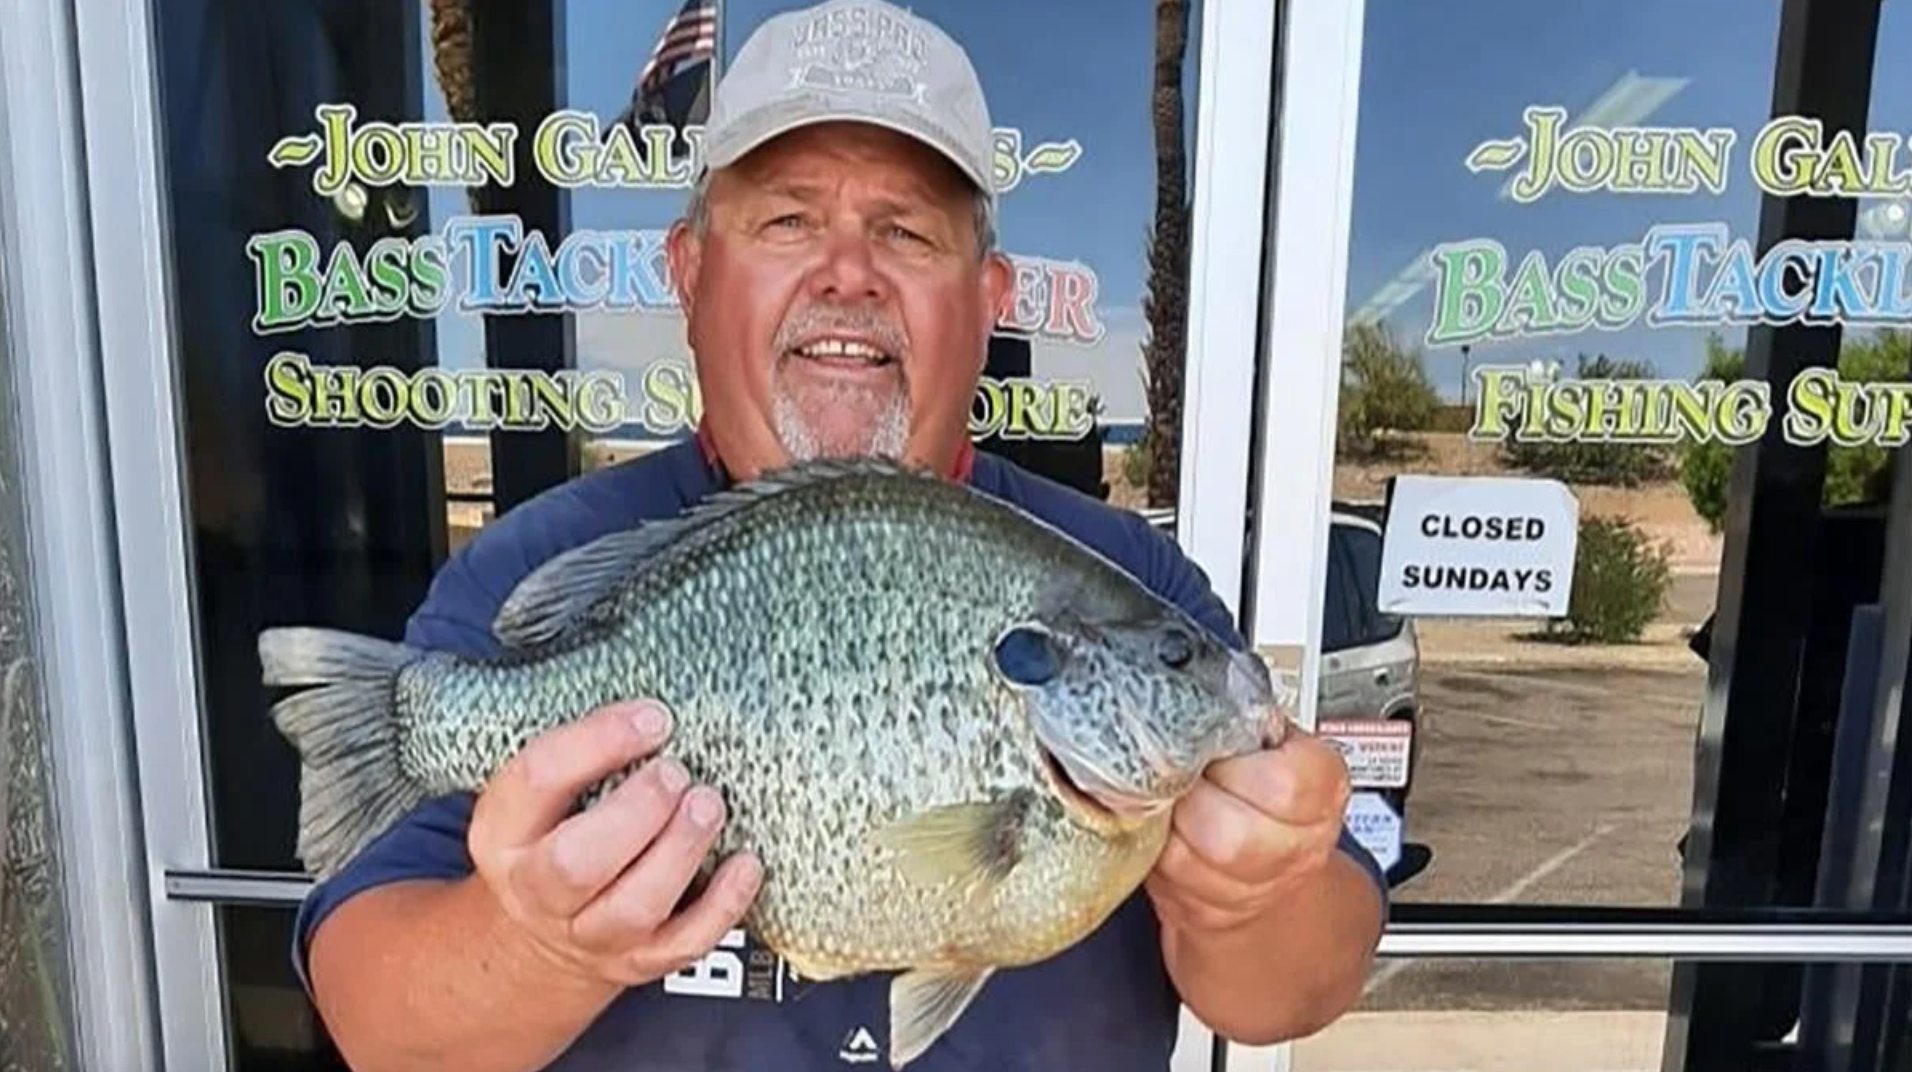 The all-tackle world record redear sunfish.